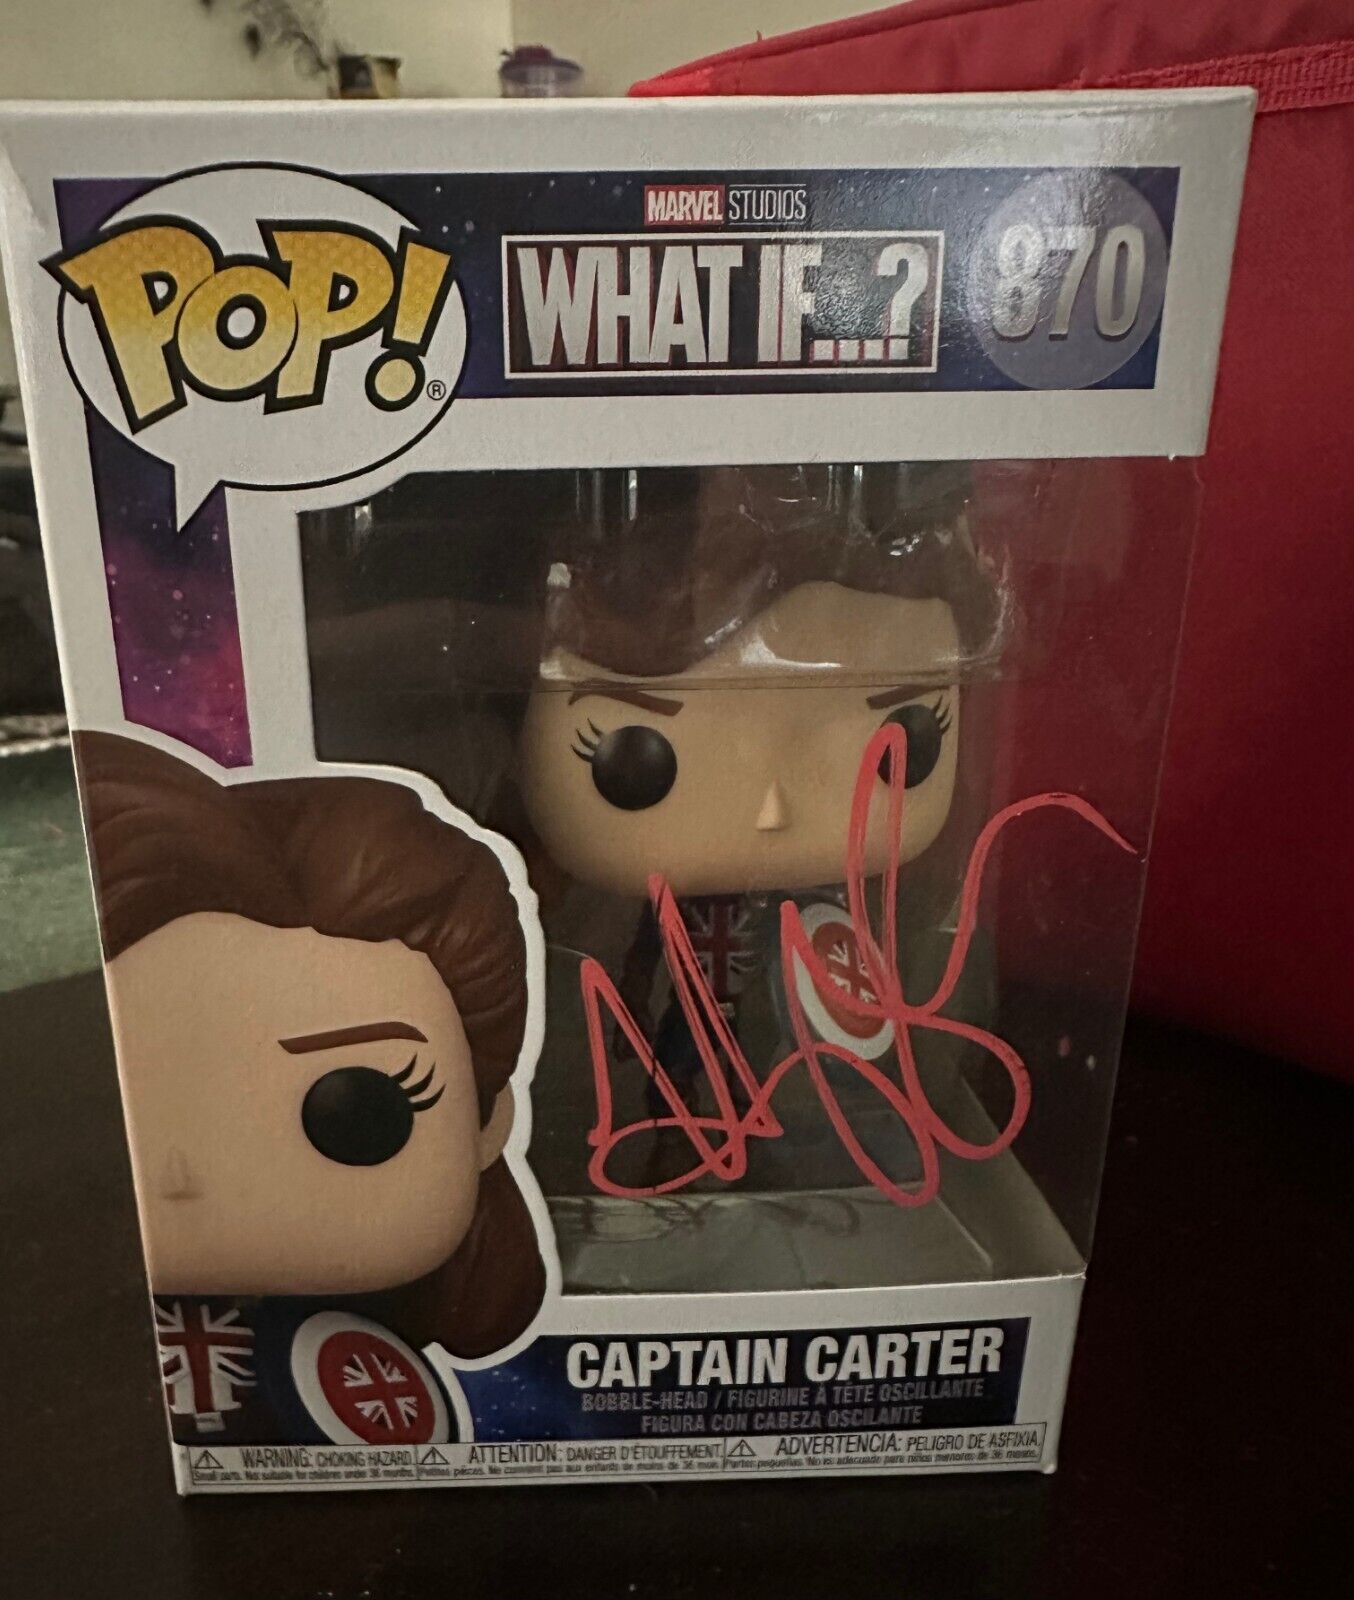 Captain Carter #870 Funko Pop Signed by Hayley Atwell (with pop protector)